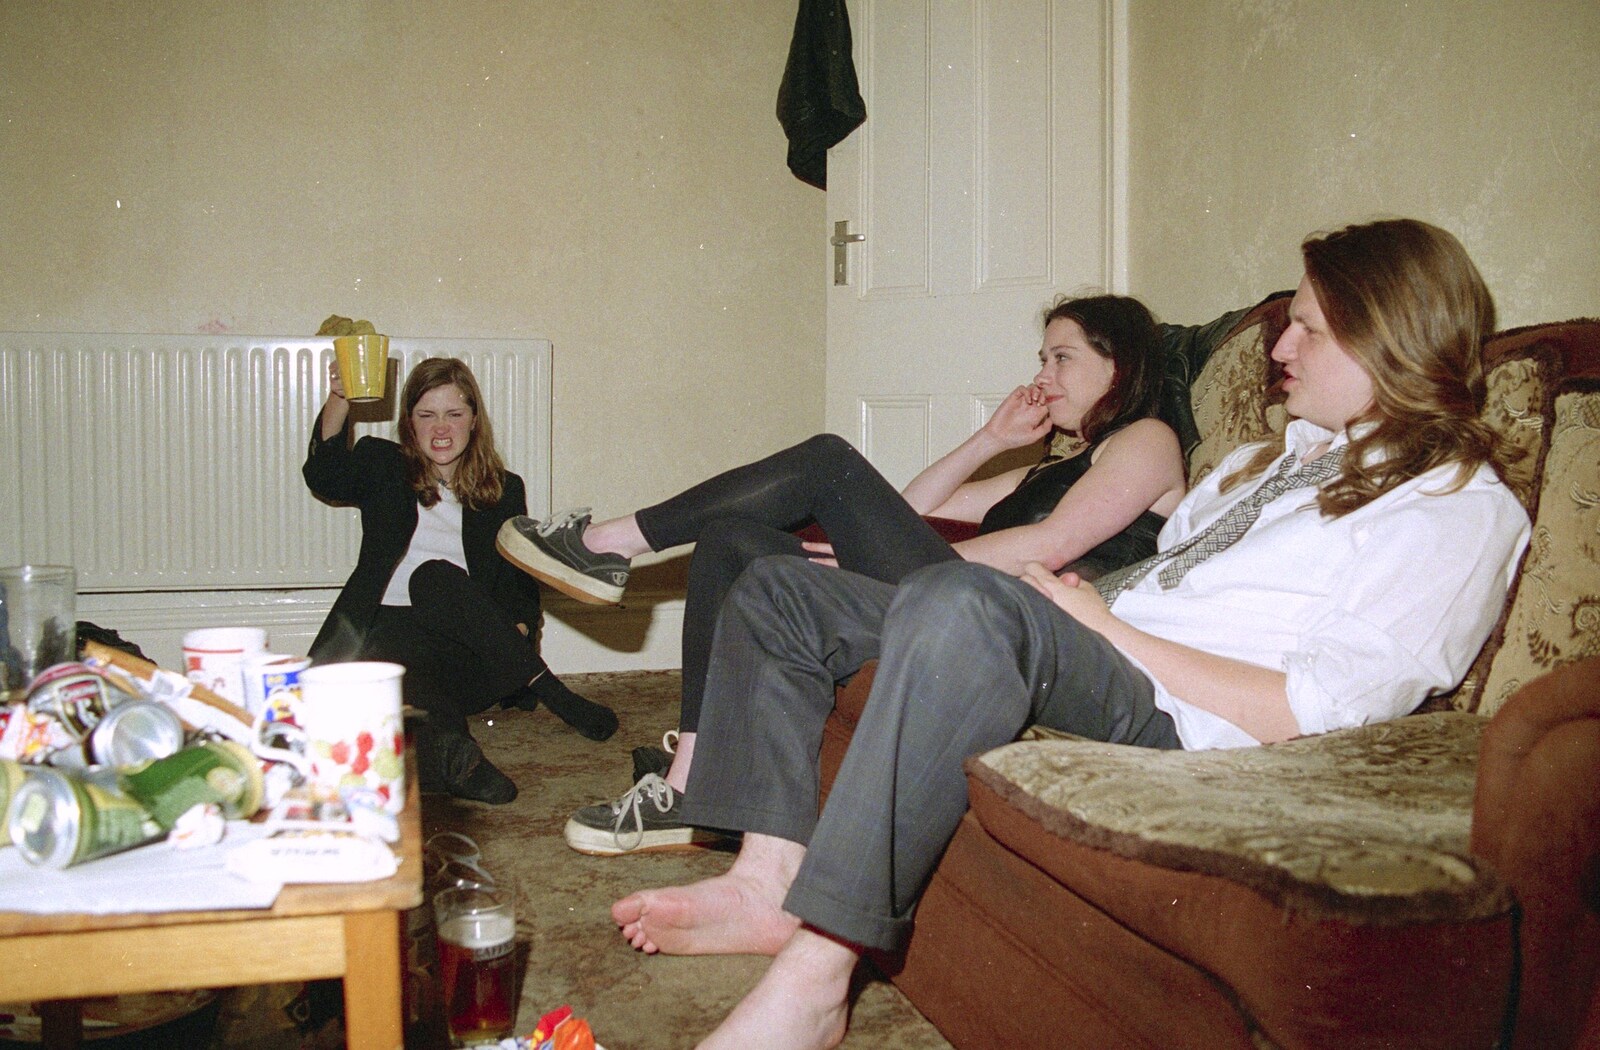 Sis Graduates from De Montfort, Leicester, Leicestershire - 9th August 1997: A toast in a coffee mug